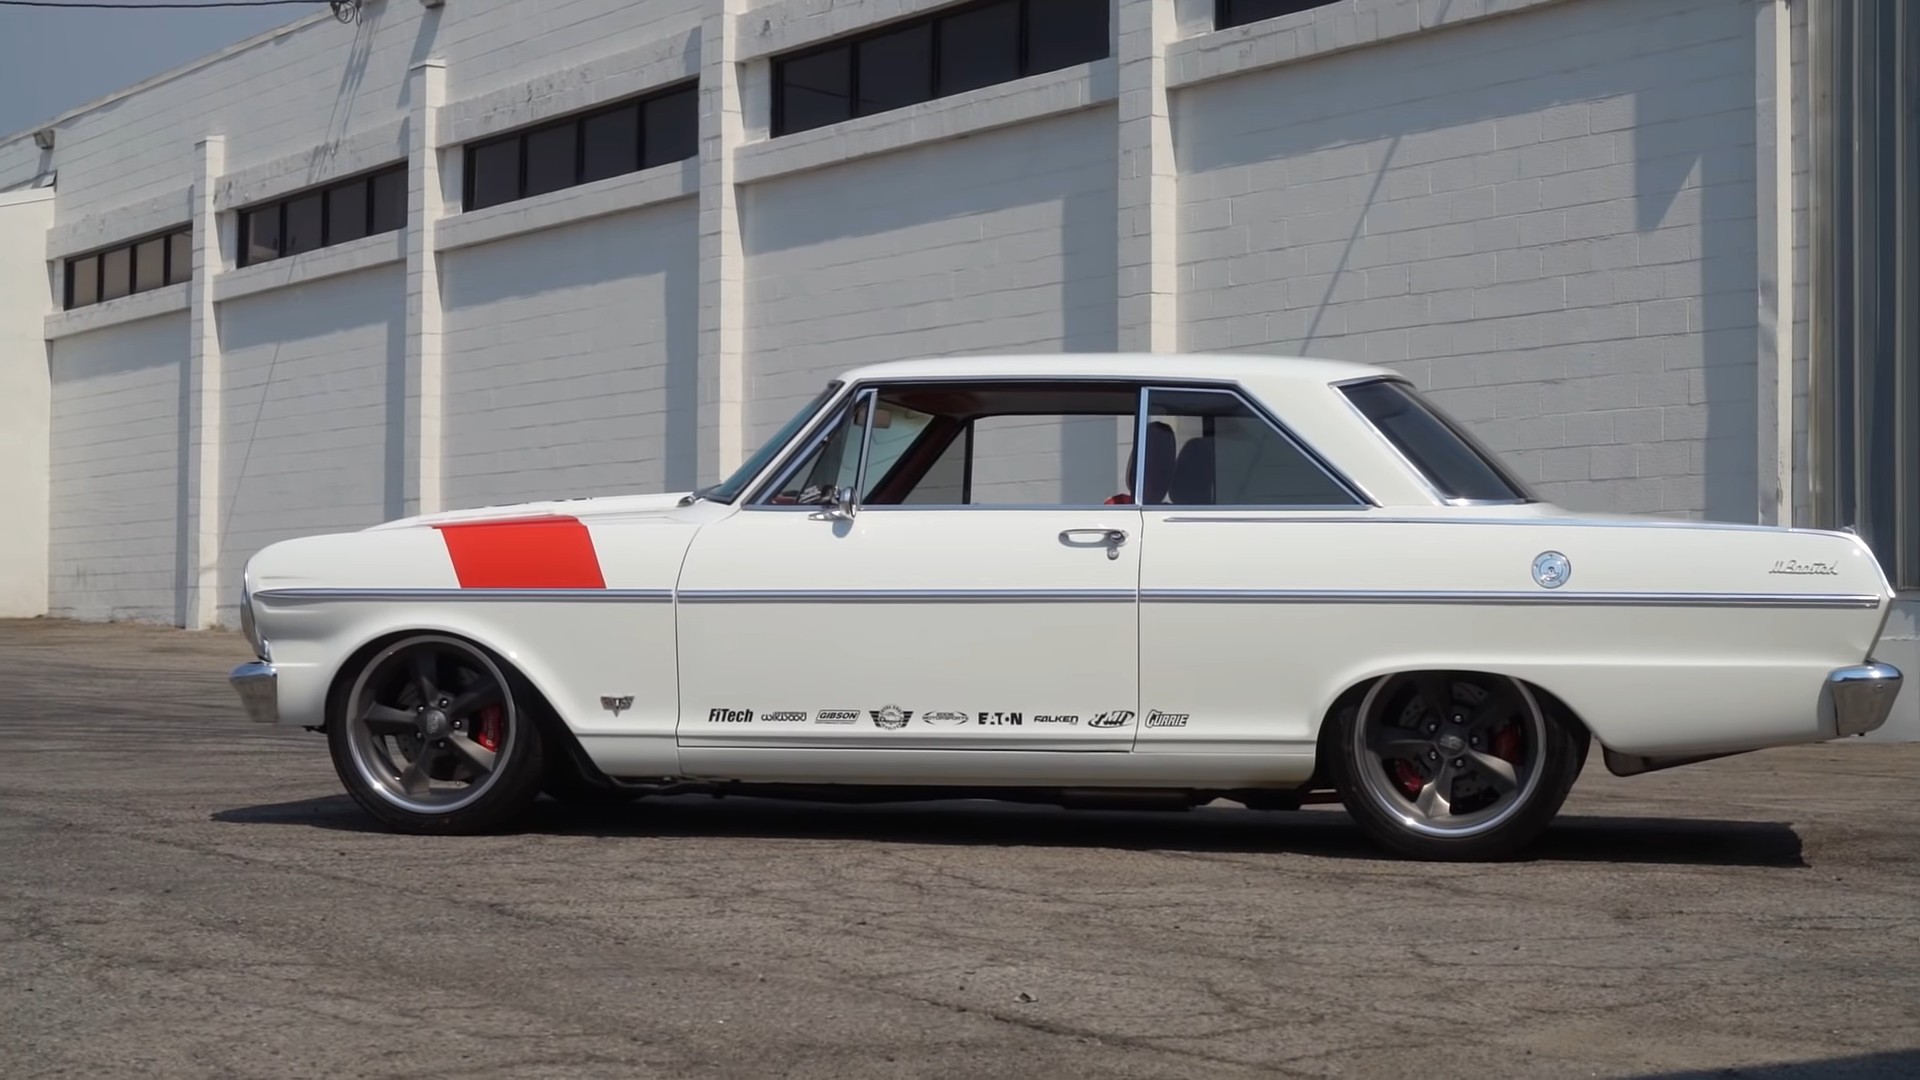 1965 Chevy II Nova Goes Pro-Touring For Proper Boosted Muscle Car Vibes.